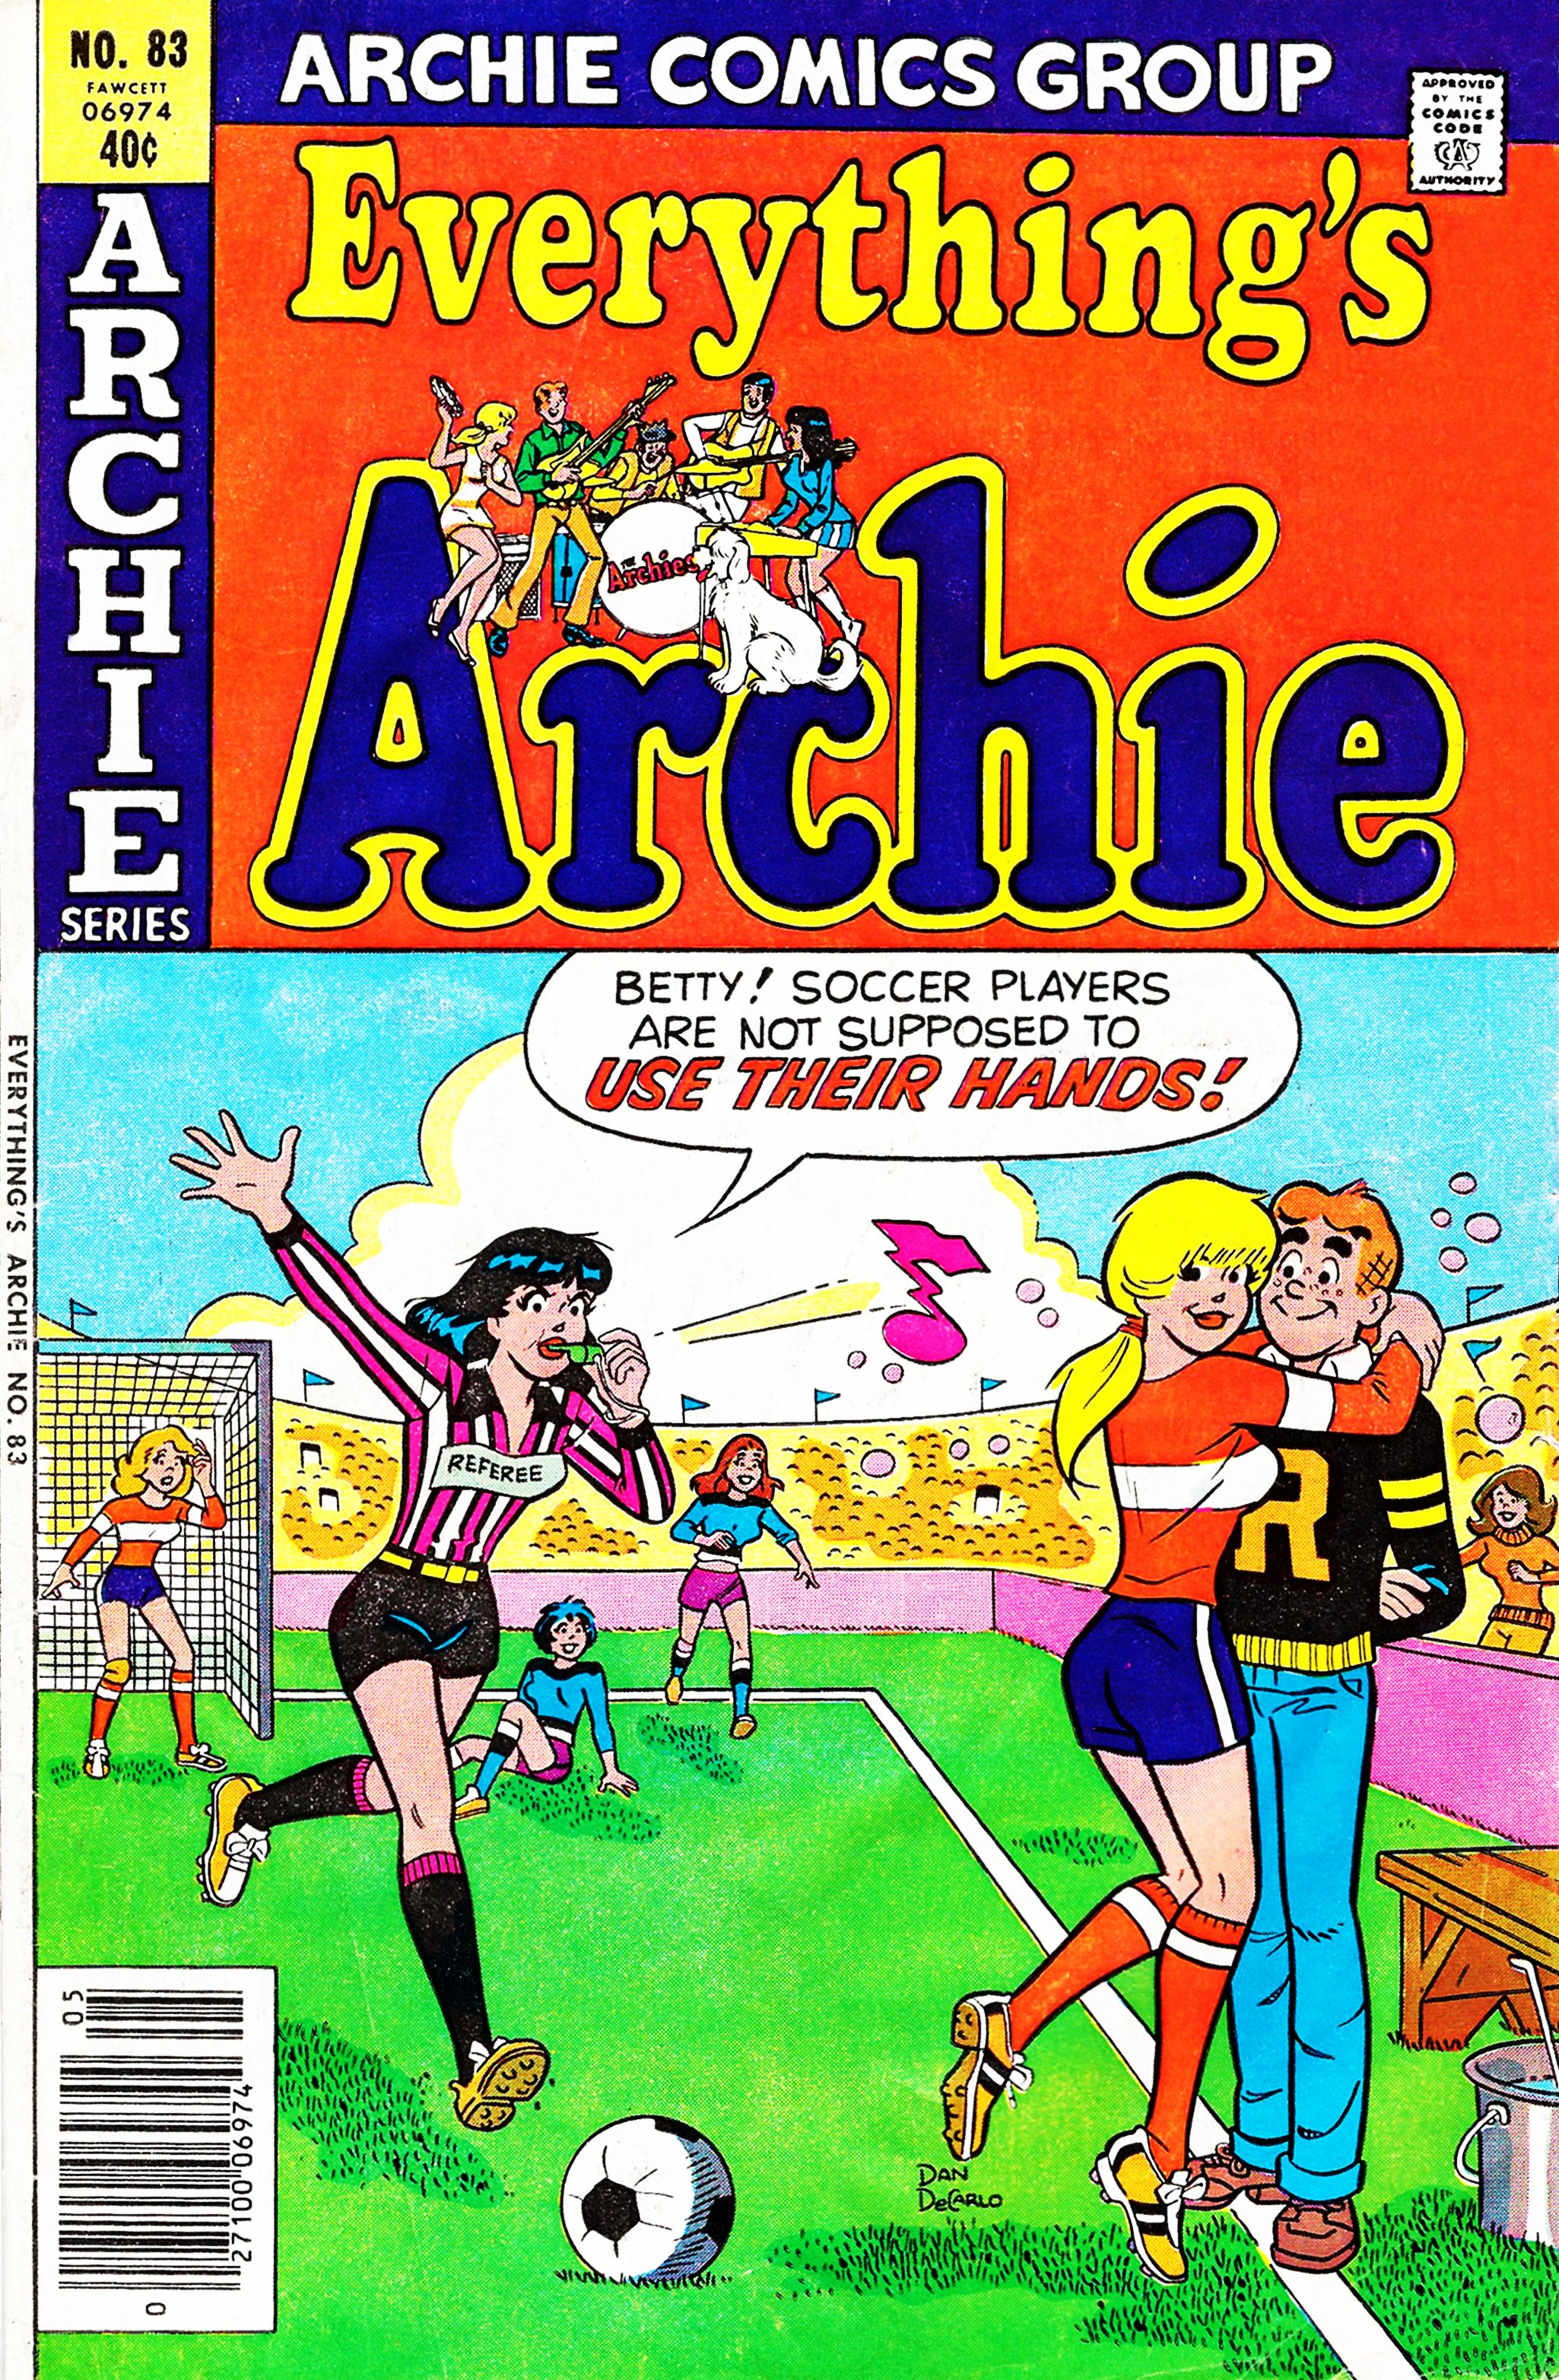 Read online Everything's Archie comic -  Issue #83 - 1